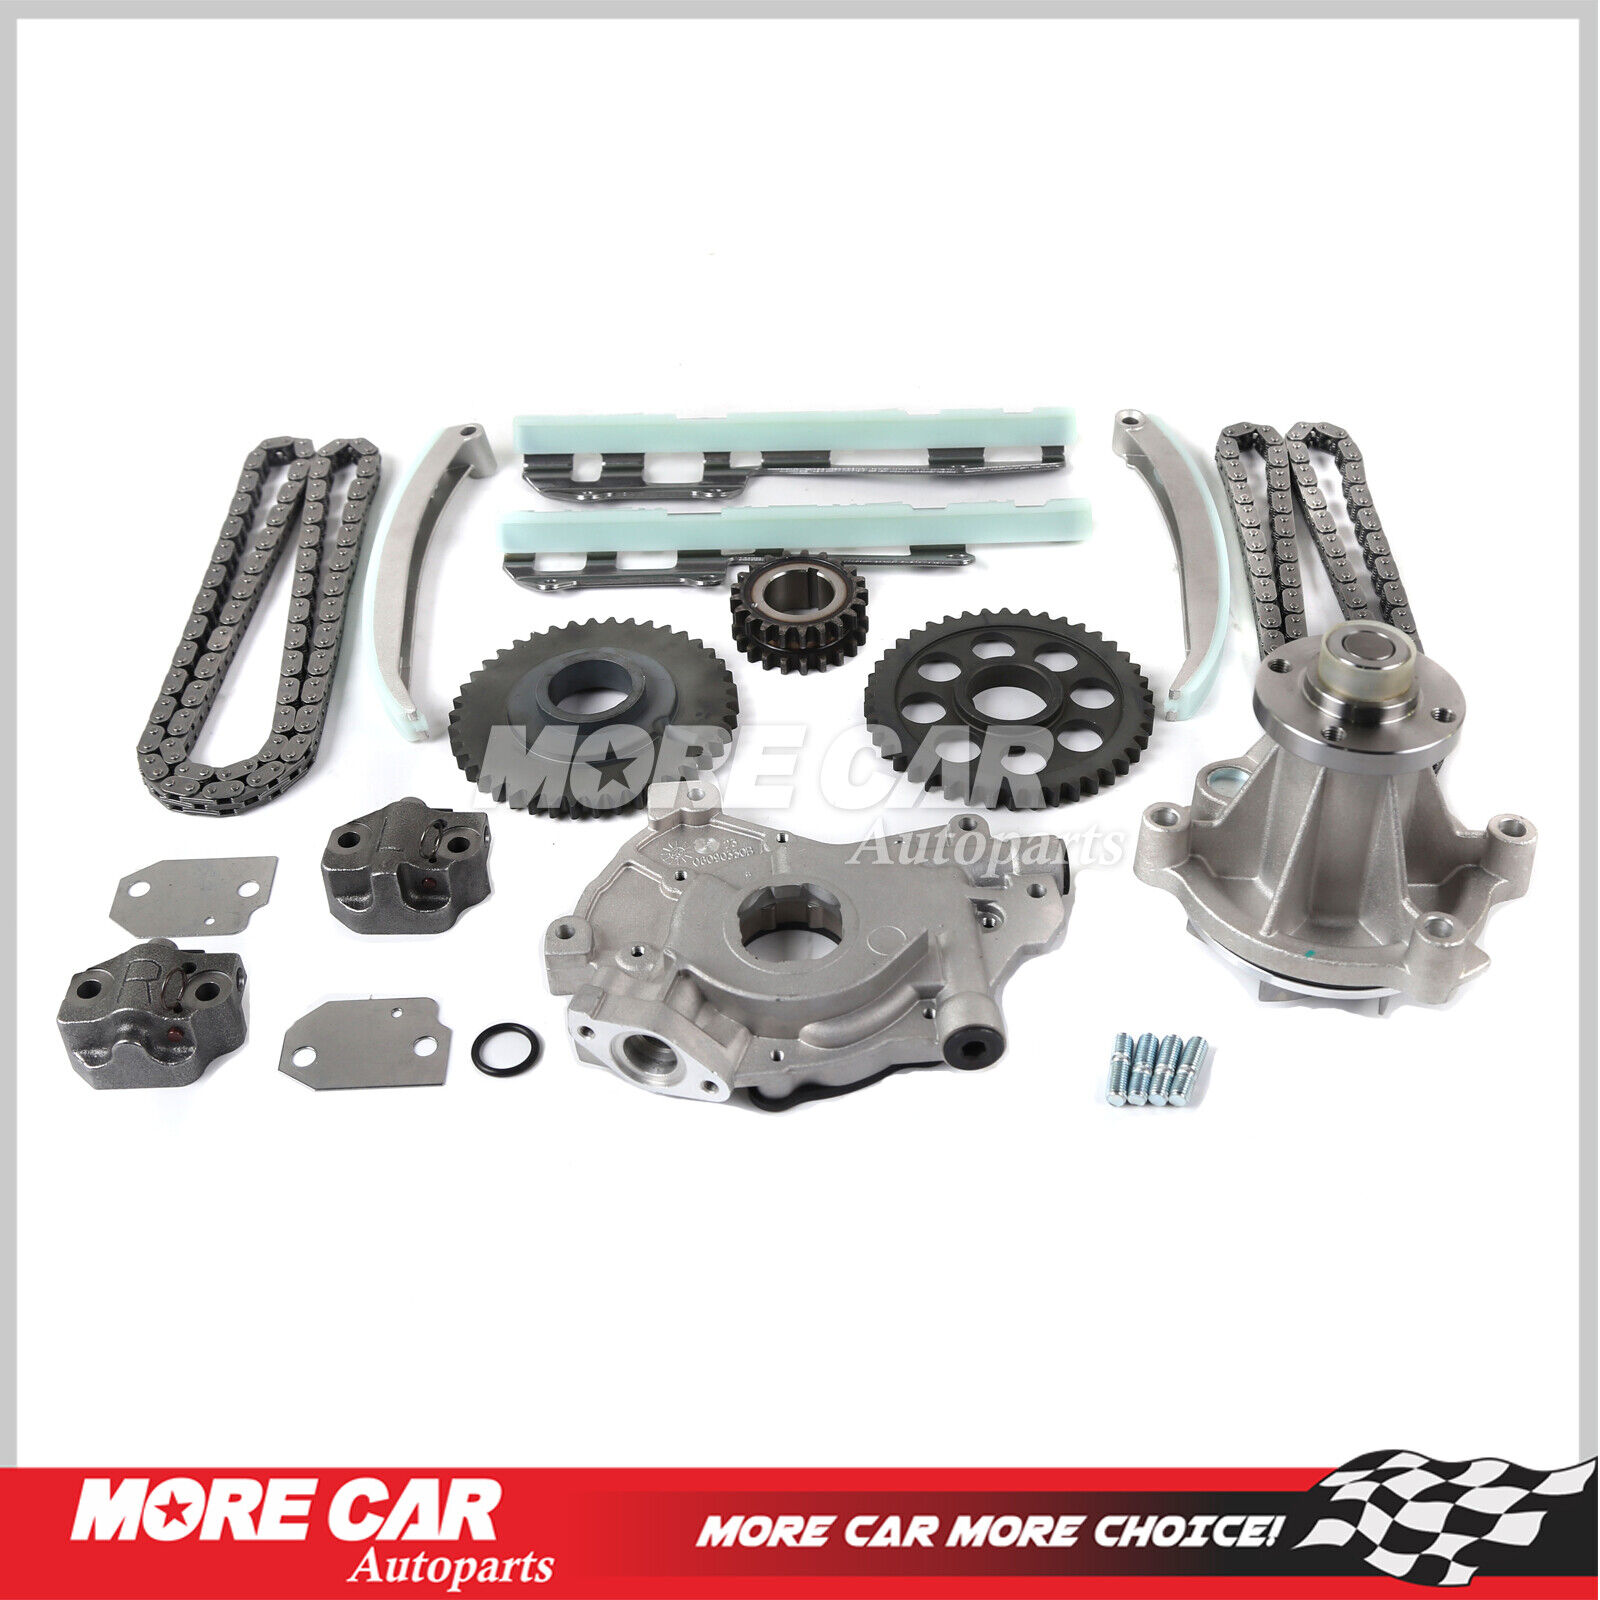 Timing Chain Kit w/ Water Oil Pump fit 97-01 Ford F-150 Explorer Expediton E-150